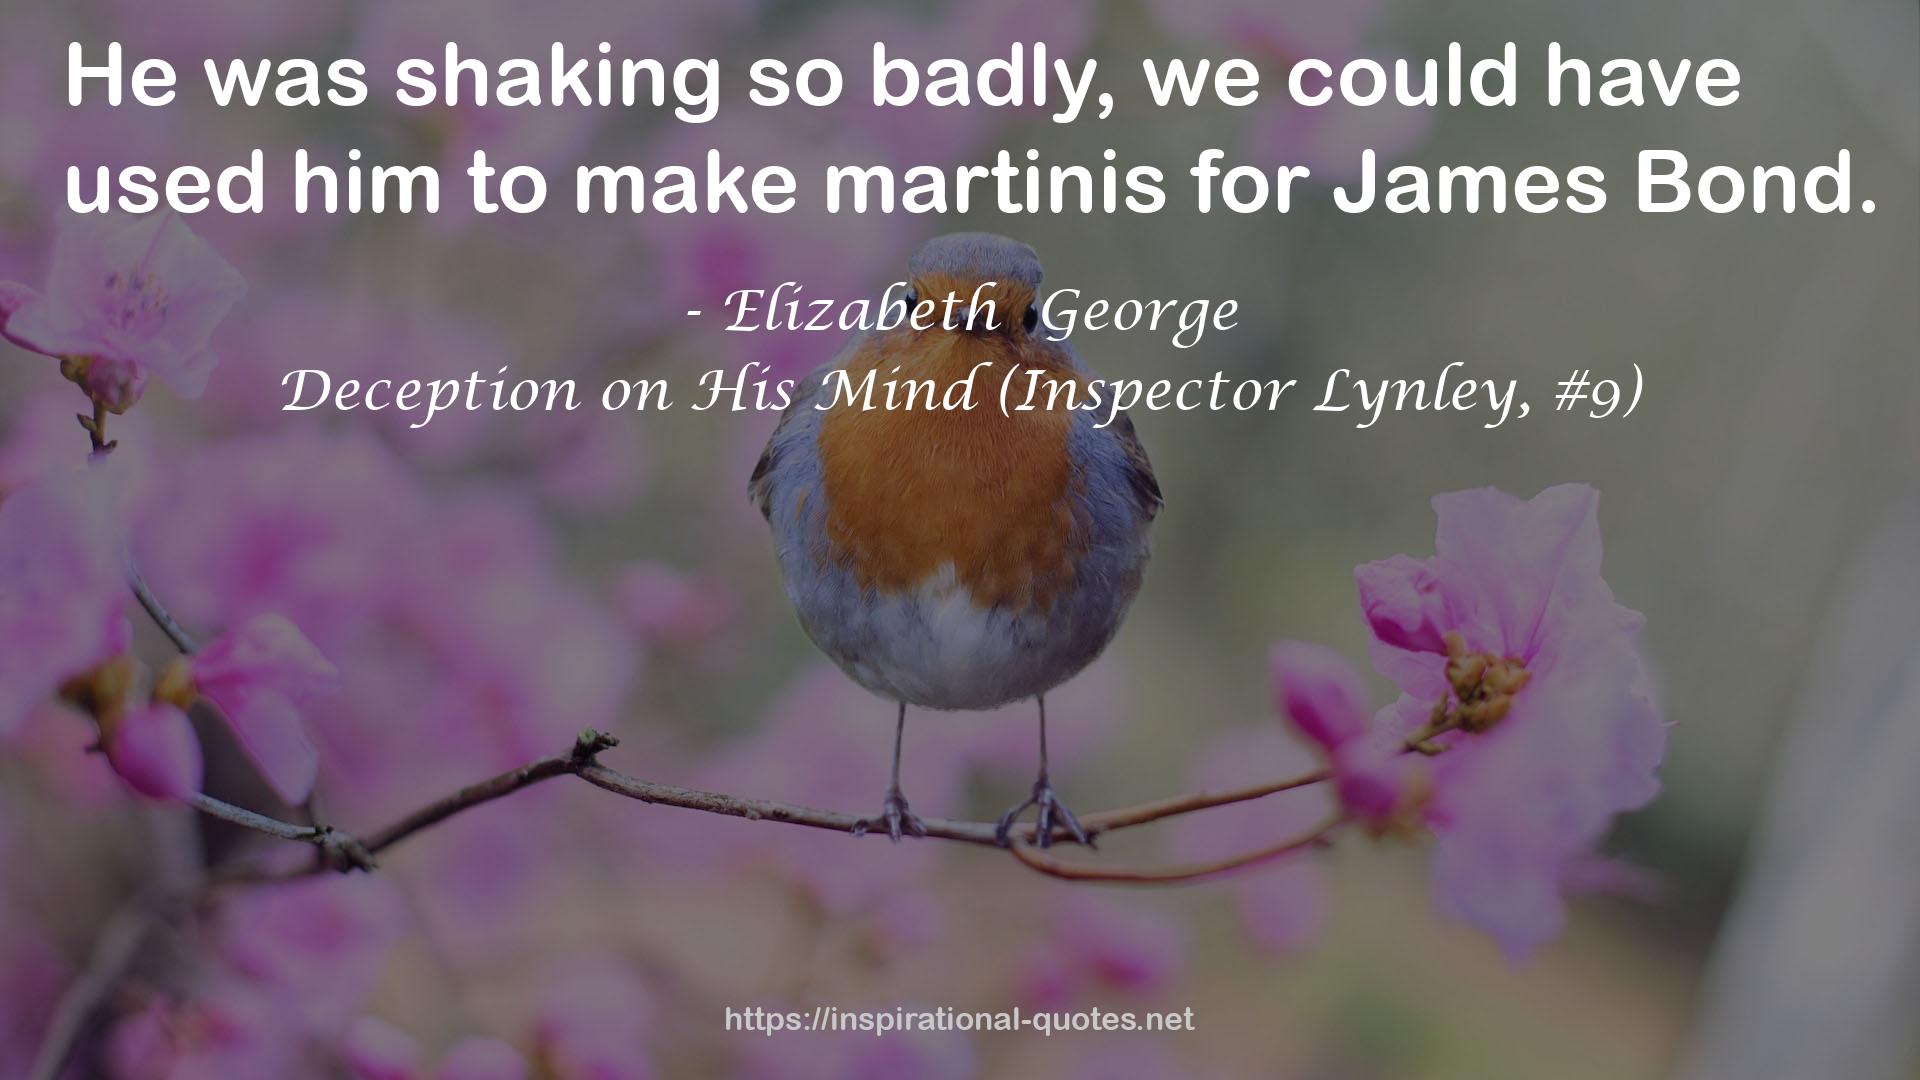 Deception on His Mind (Inspector Lynley, #9) QUOTES